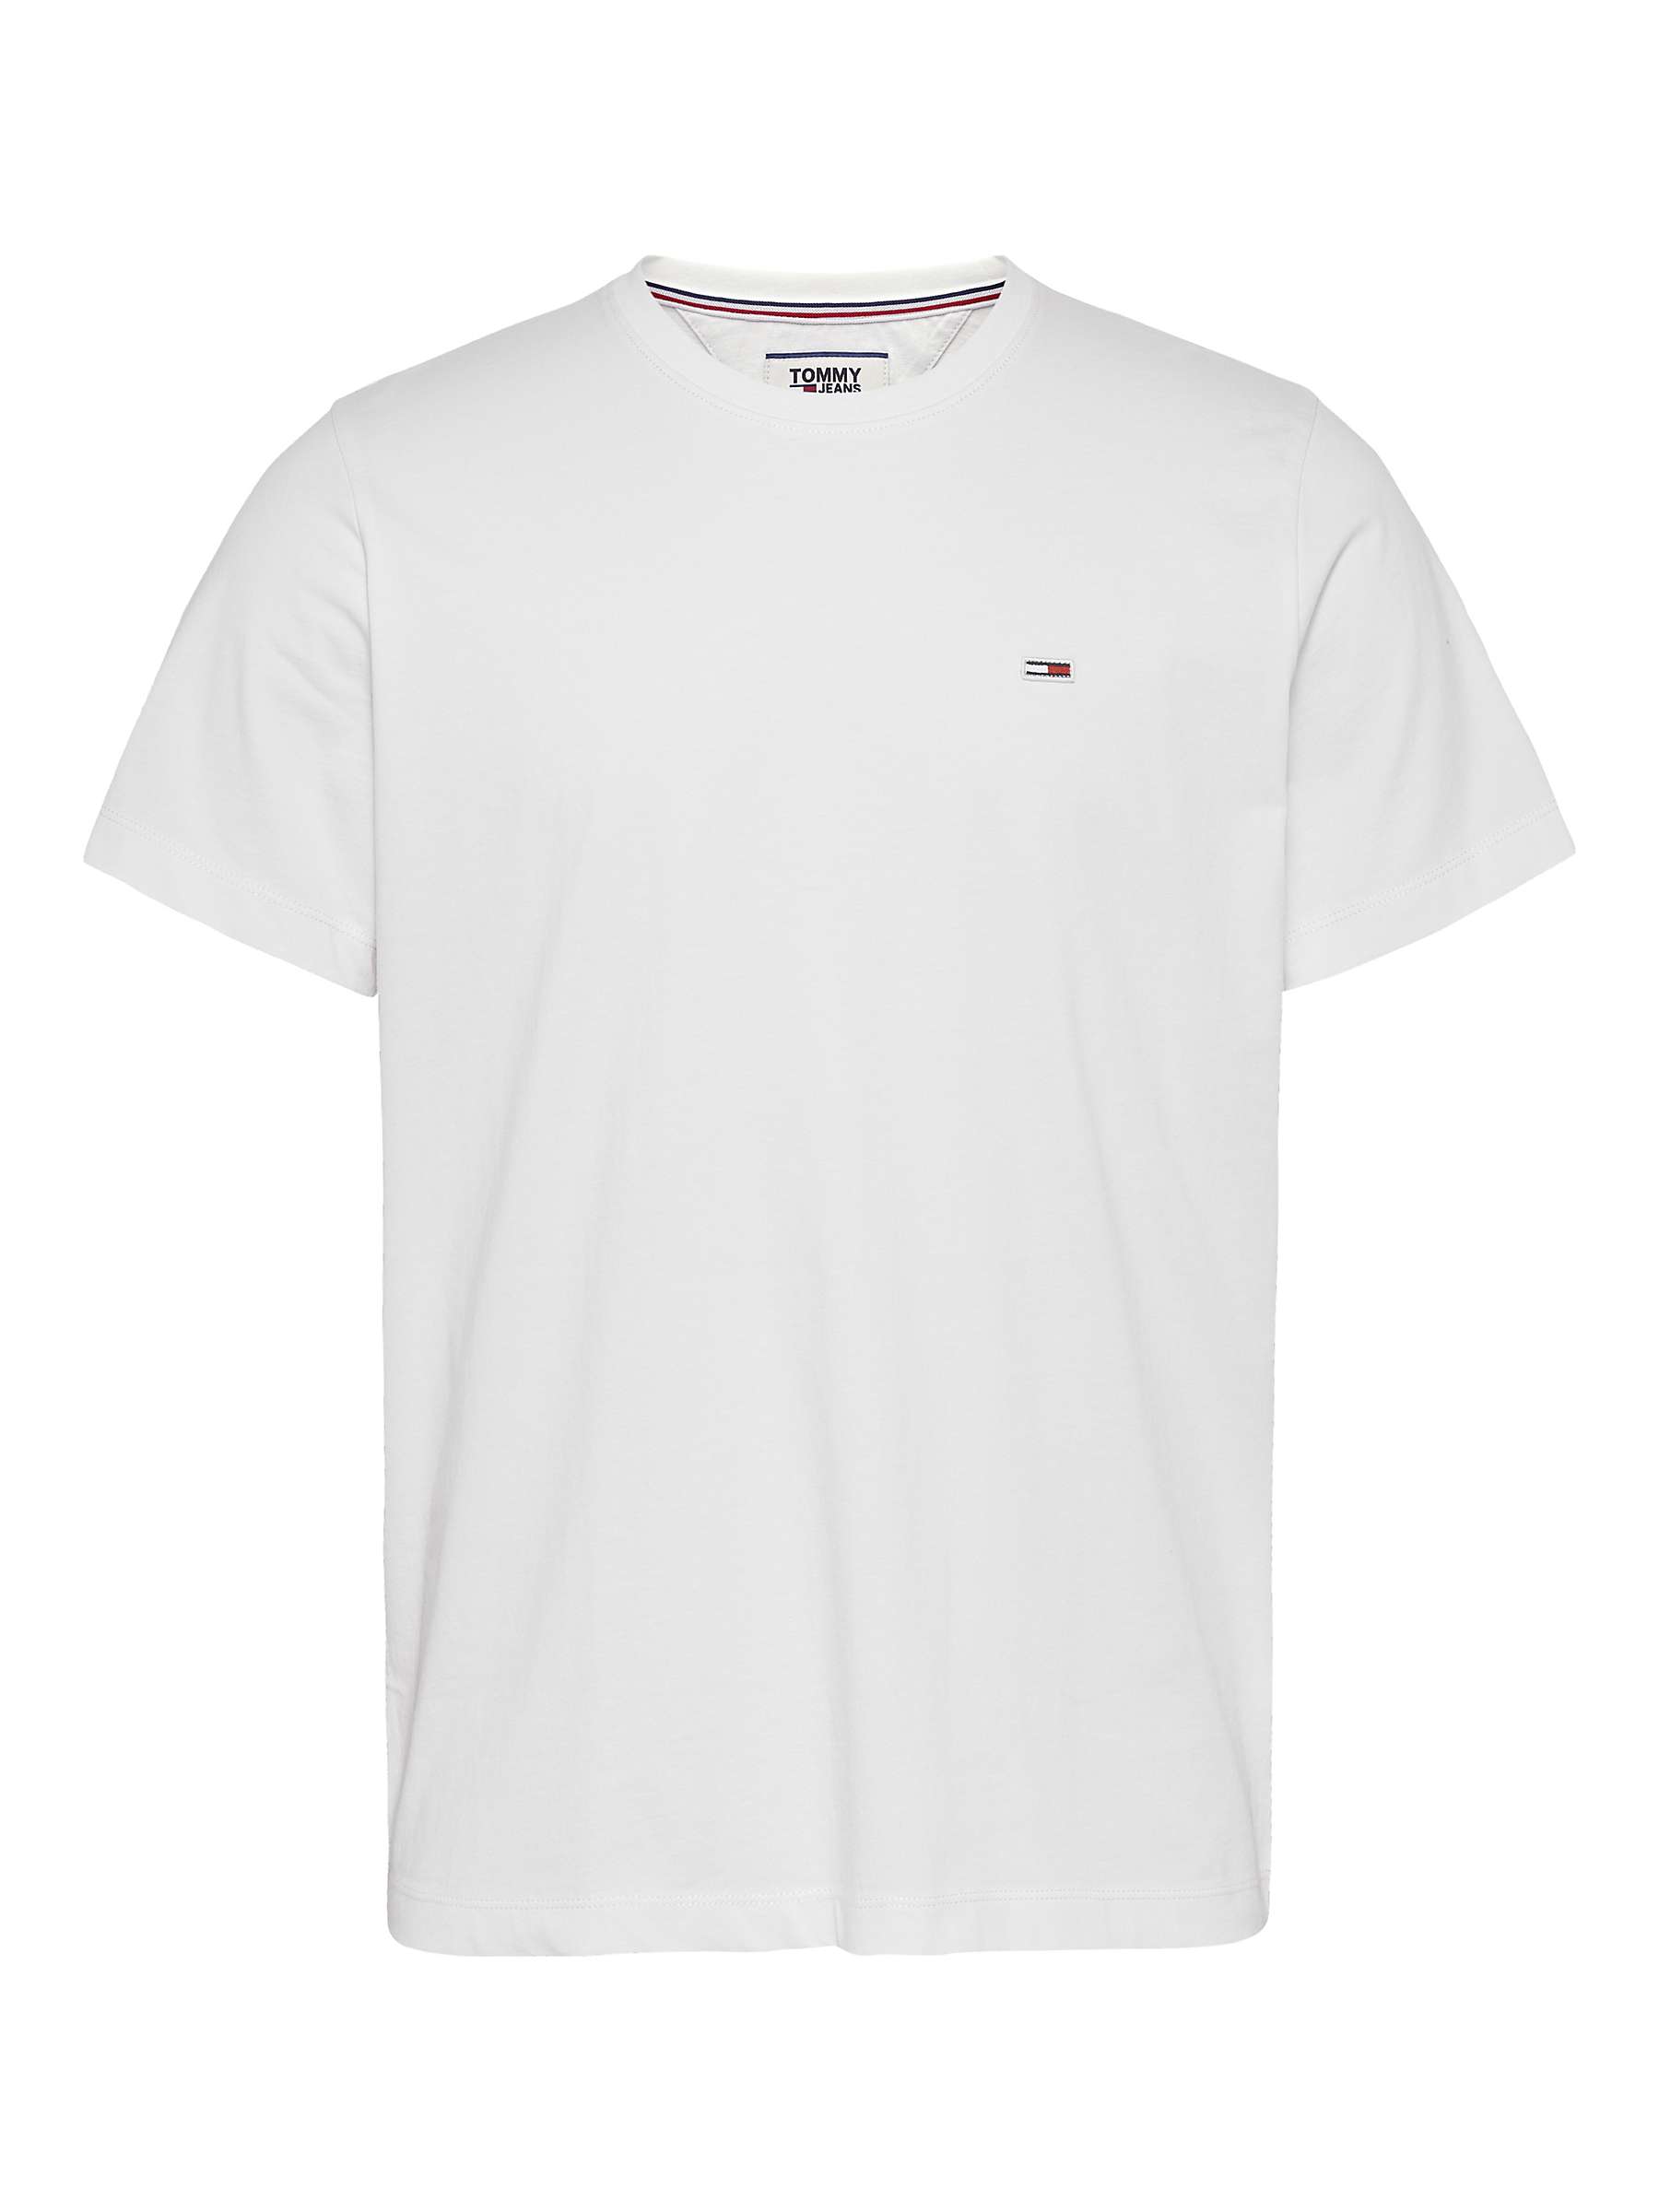 Tommy Jeans Jersey Crew Neck Tee, White at John Lewis & Partners